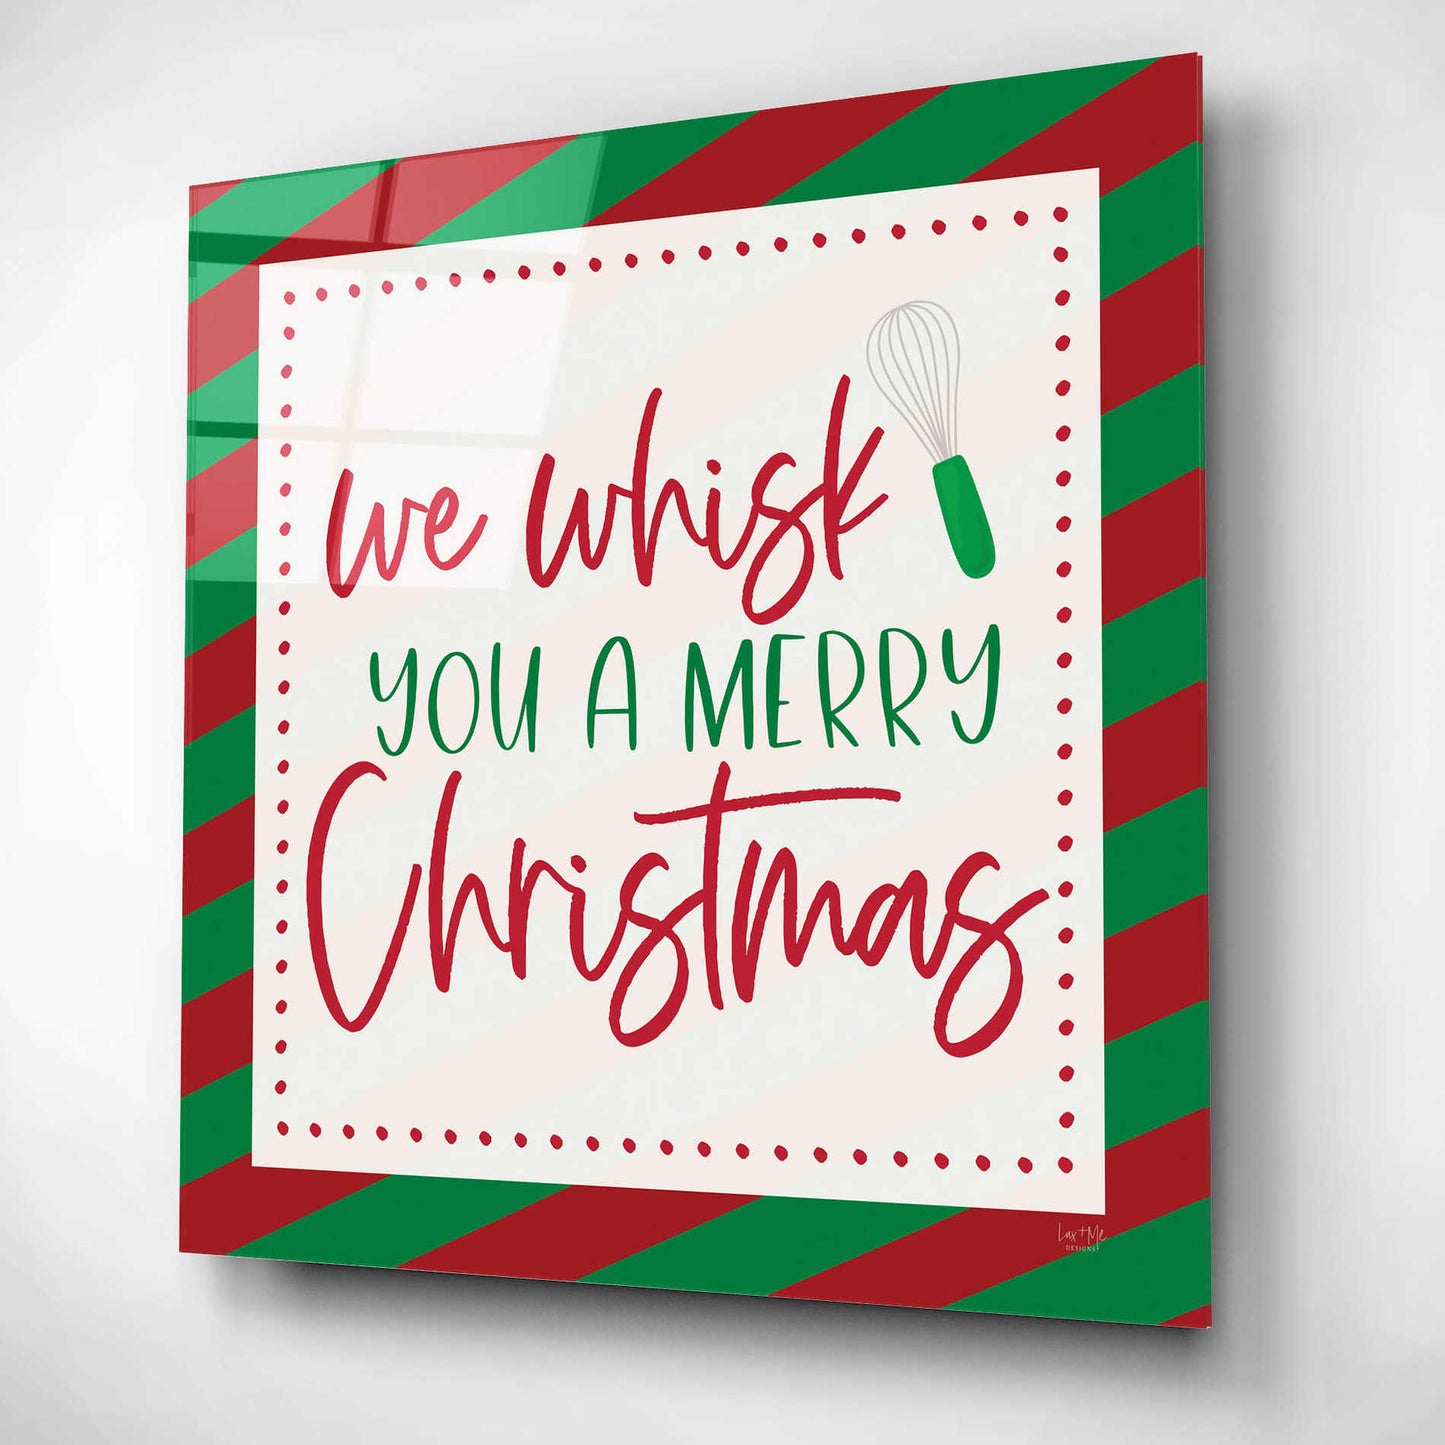 Epic Art 'We Wisk You a Merry Christmas' by Lux + Me, Acrylic Glass Wall Art,12x12